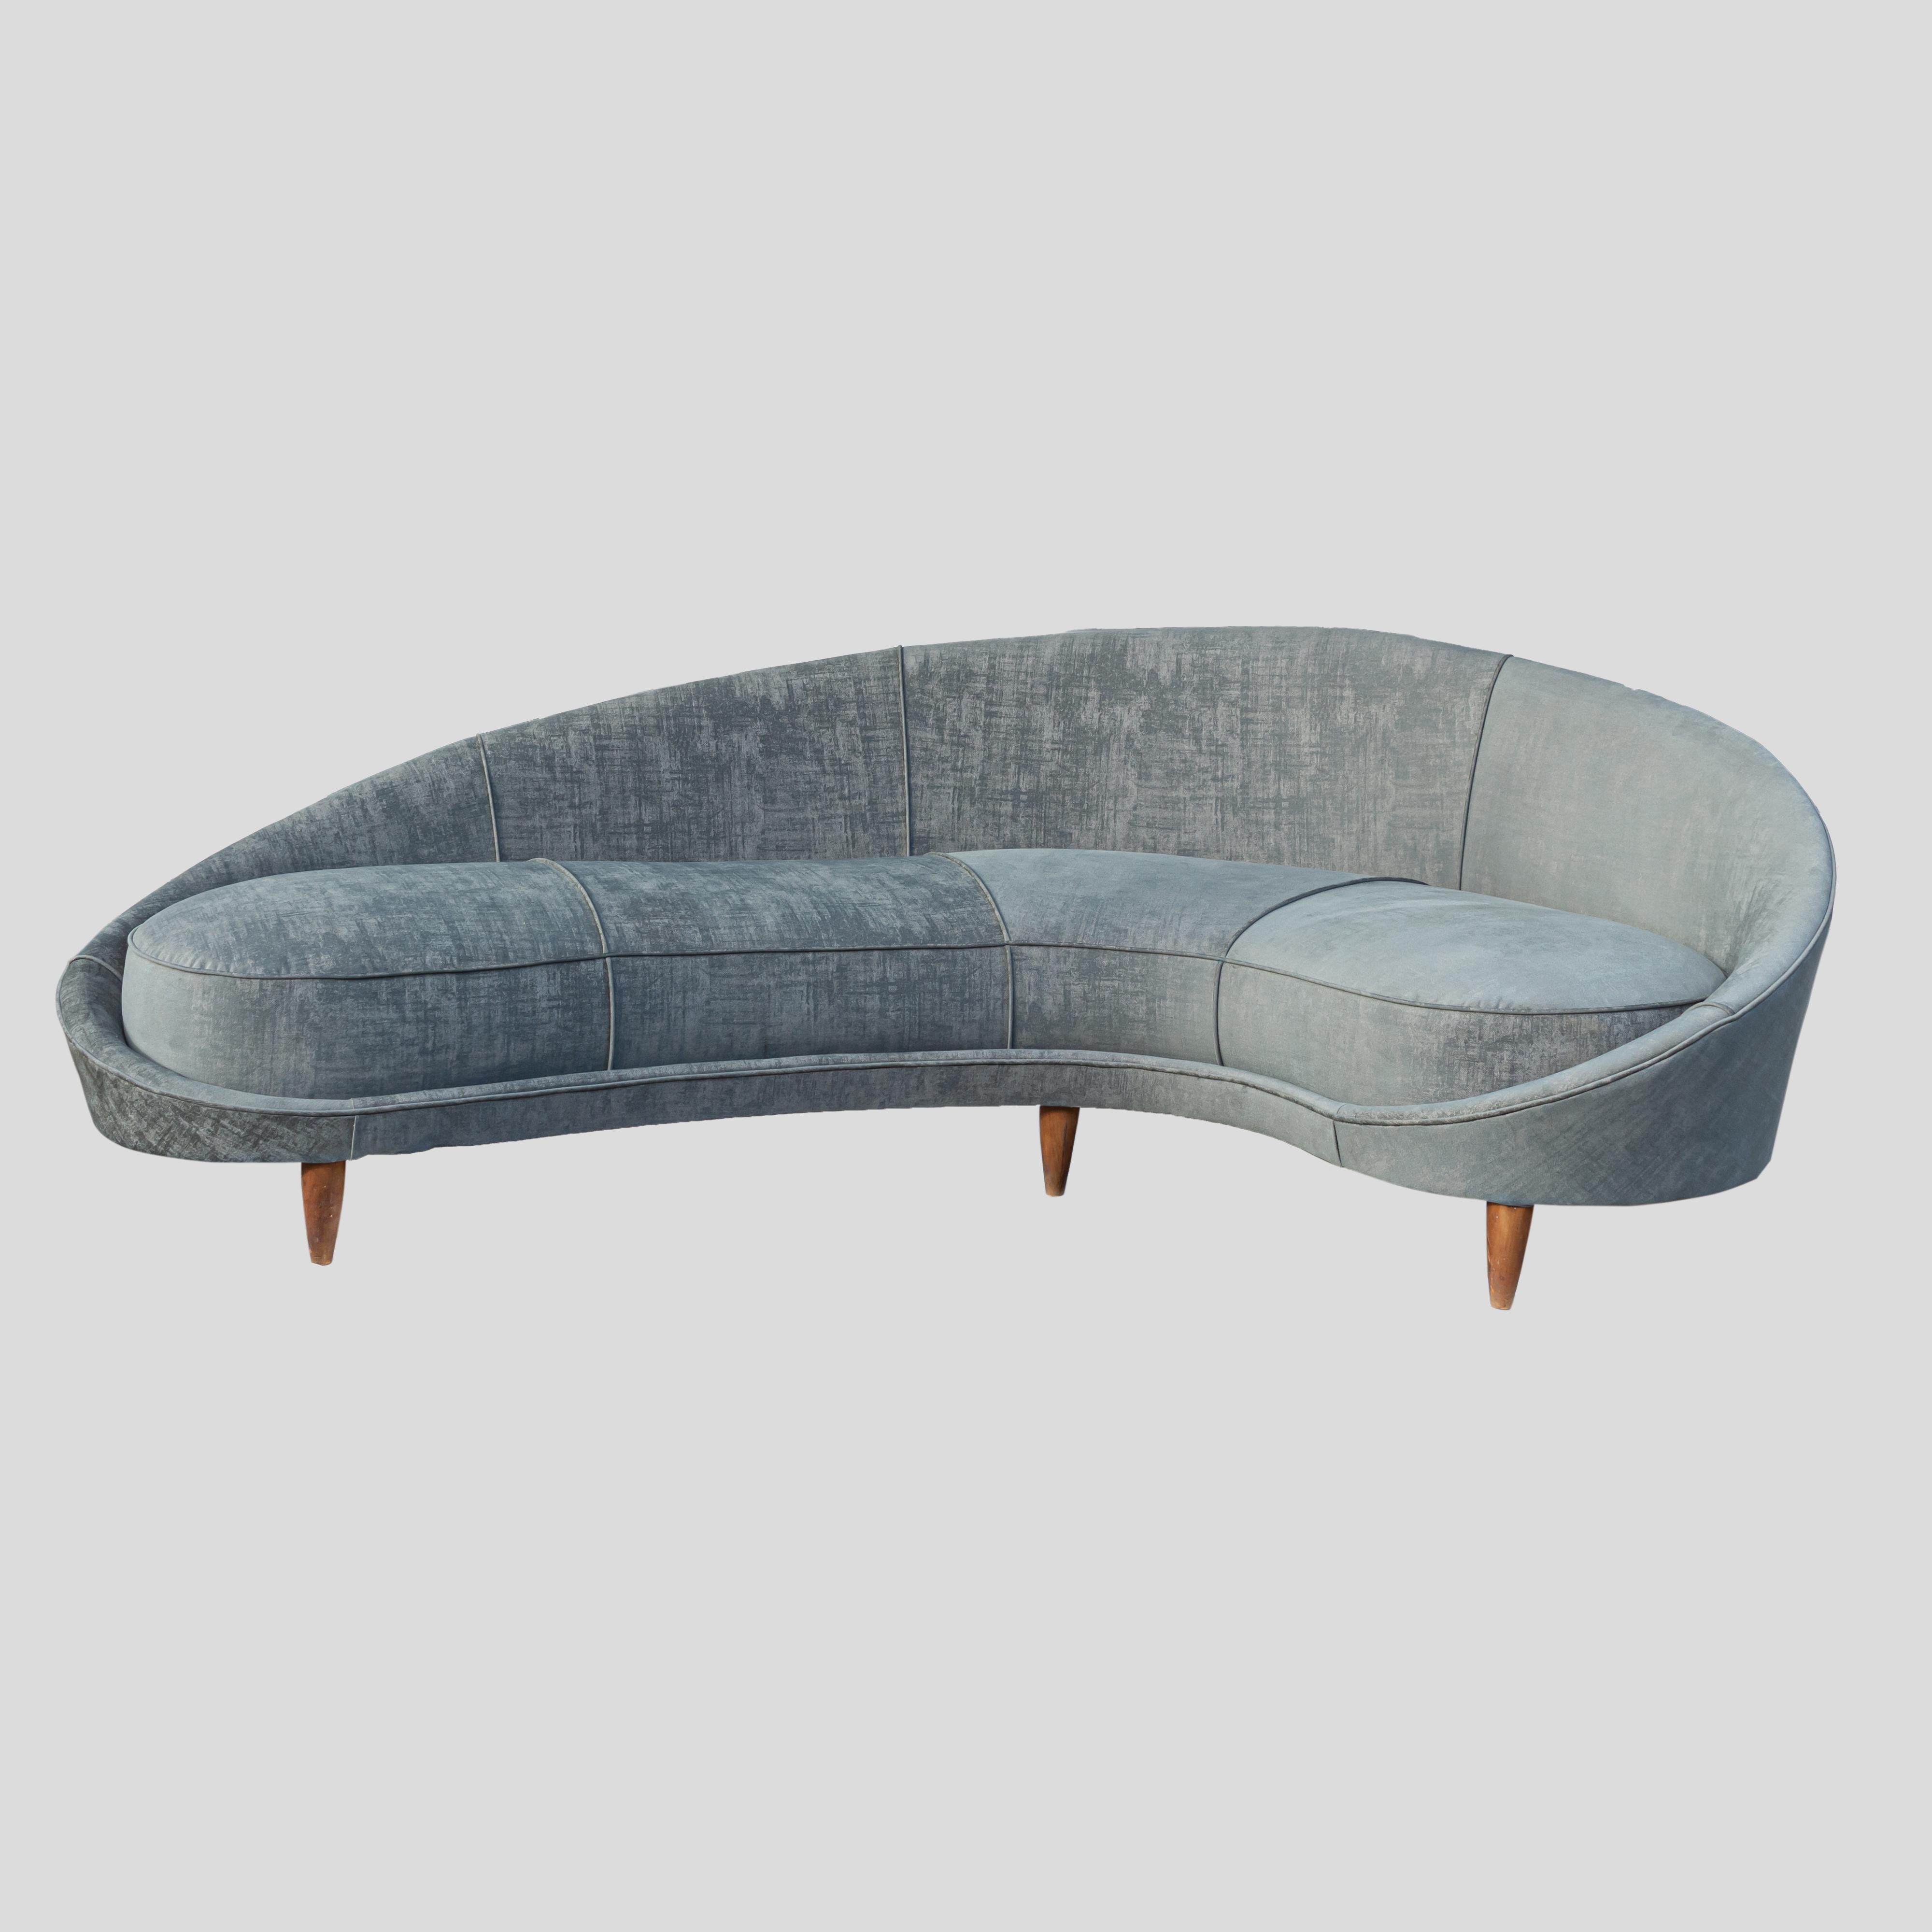 This vintage curved sofa designed by Federico Munari is a mid-century Italian classic. Completely restored and re-upholstered in an organic grey damask velvet with geometric pattern. This is truly individual piece that will add warmth and comfort to